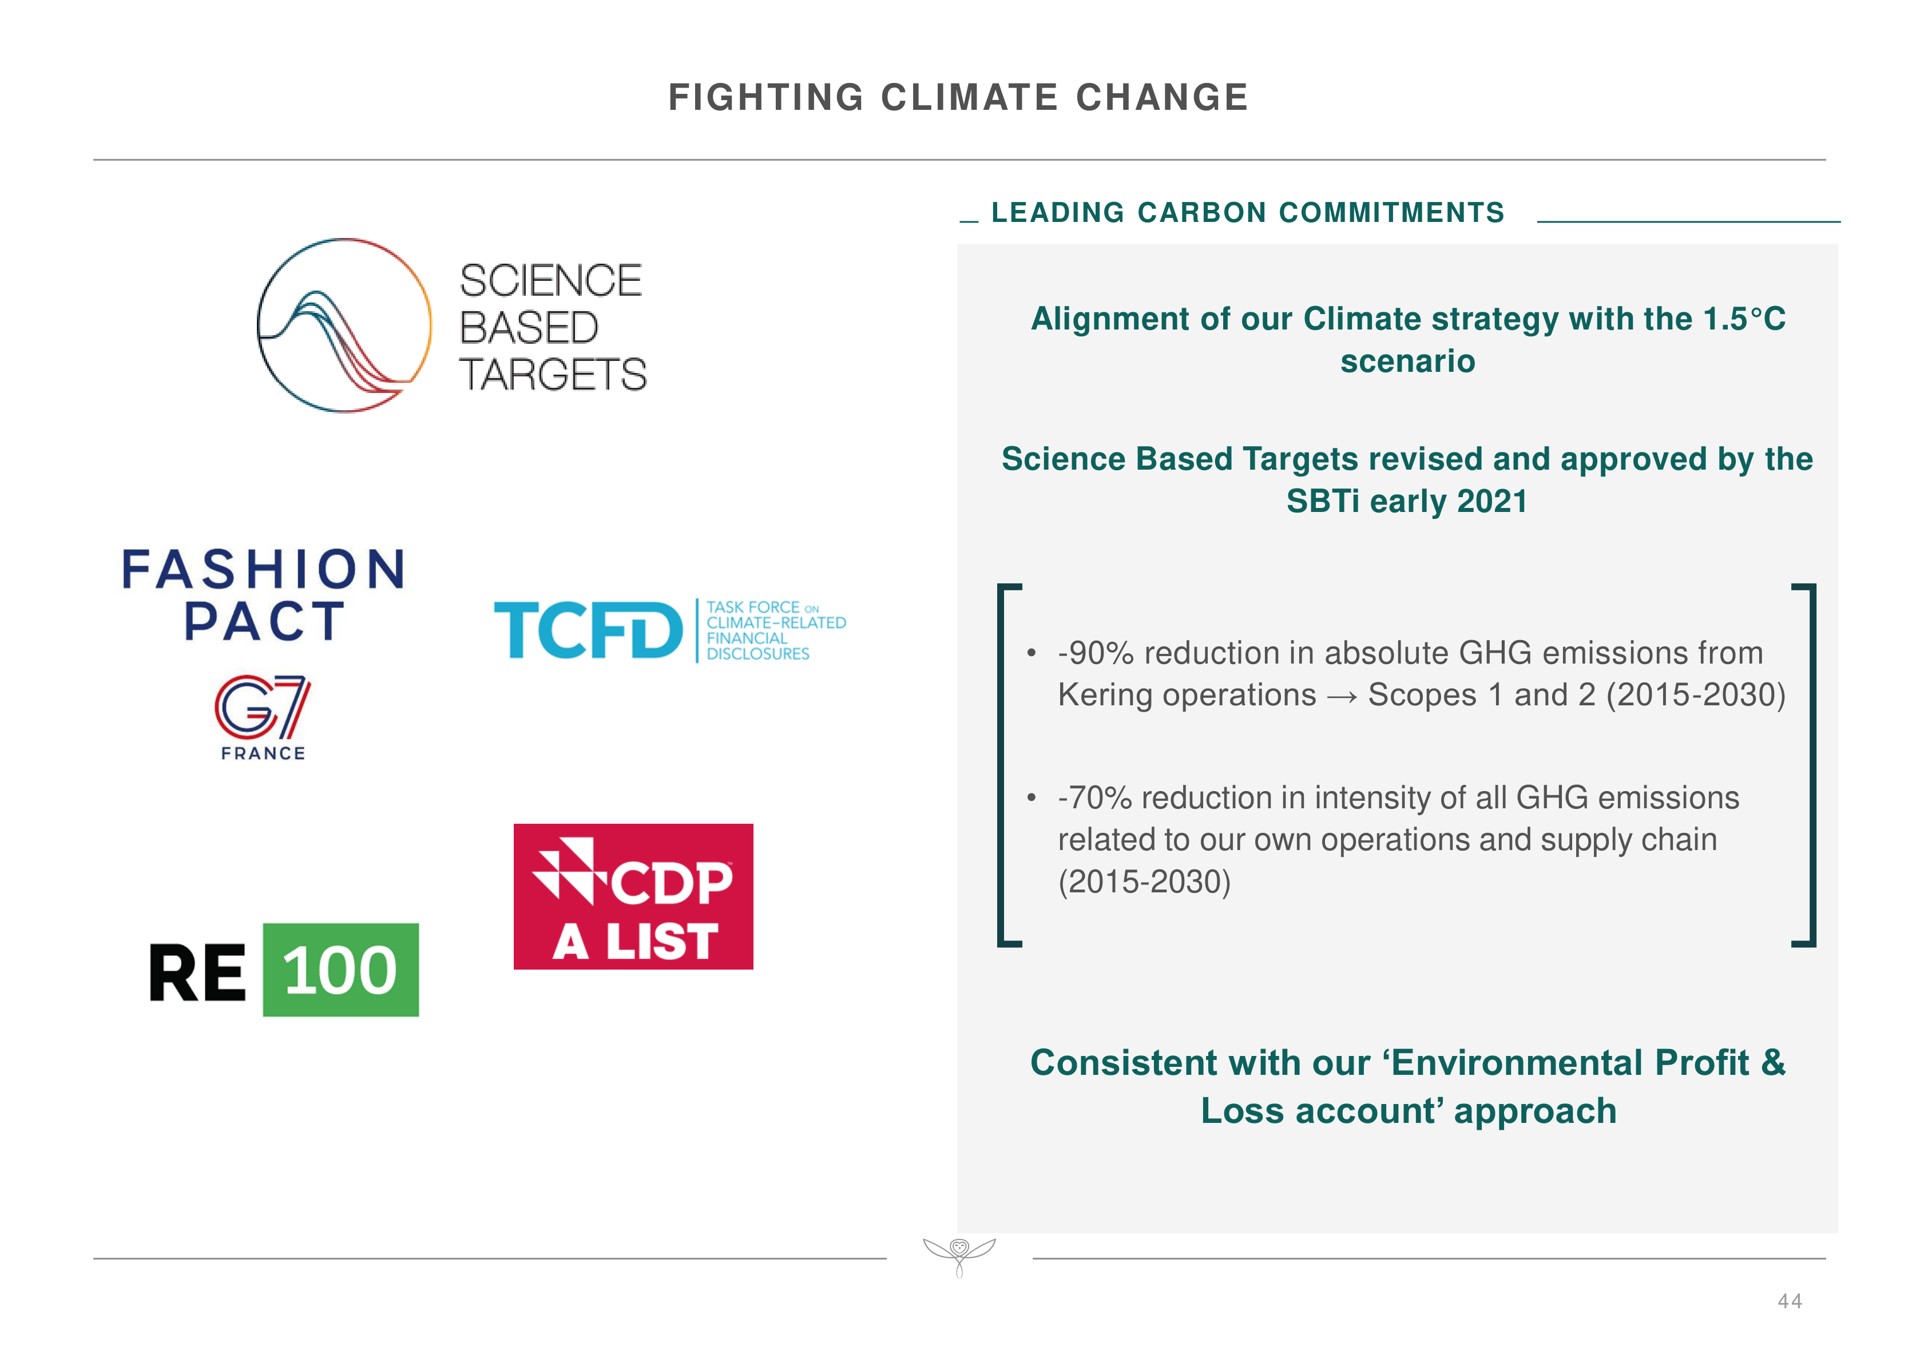 fighting climate change alignment of our climate strategy with the scenario science based targets revised and approved by the early reduction in absolute emissions from operations scopes and reduction in intensity of all emissions related to our own operations and supply chain consistent with our environmental profit loss account approach fashion pact | Kering